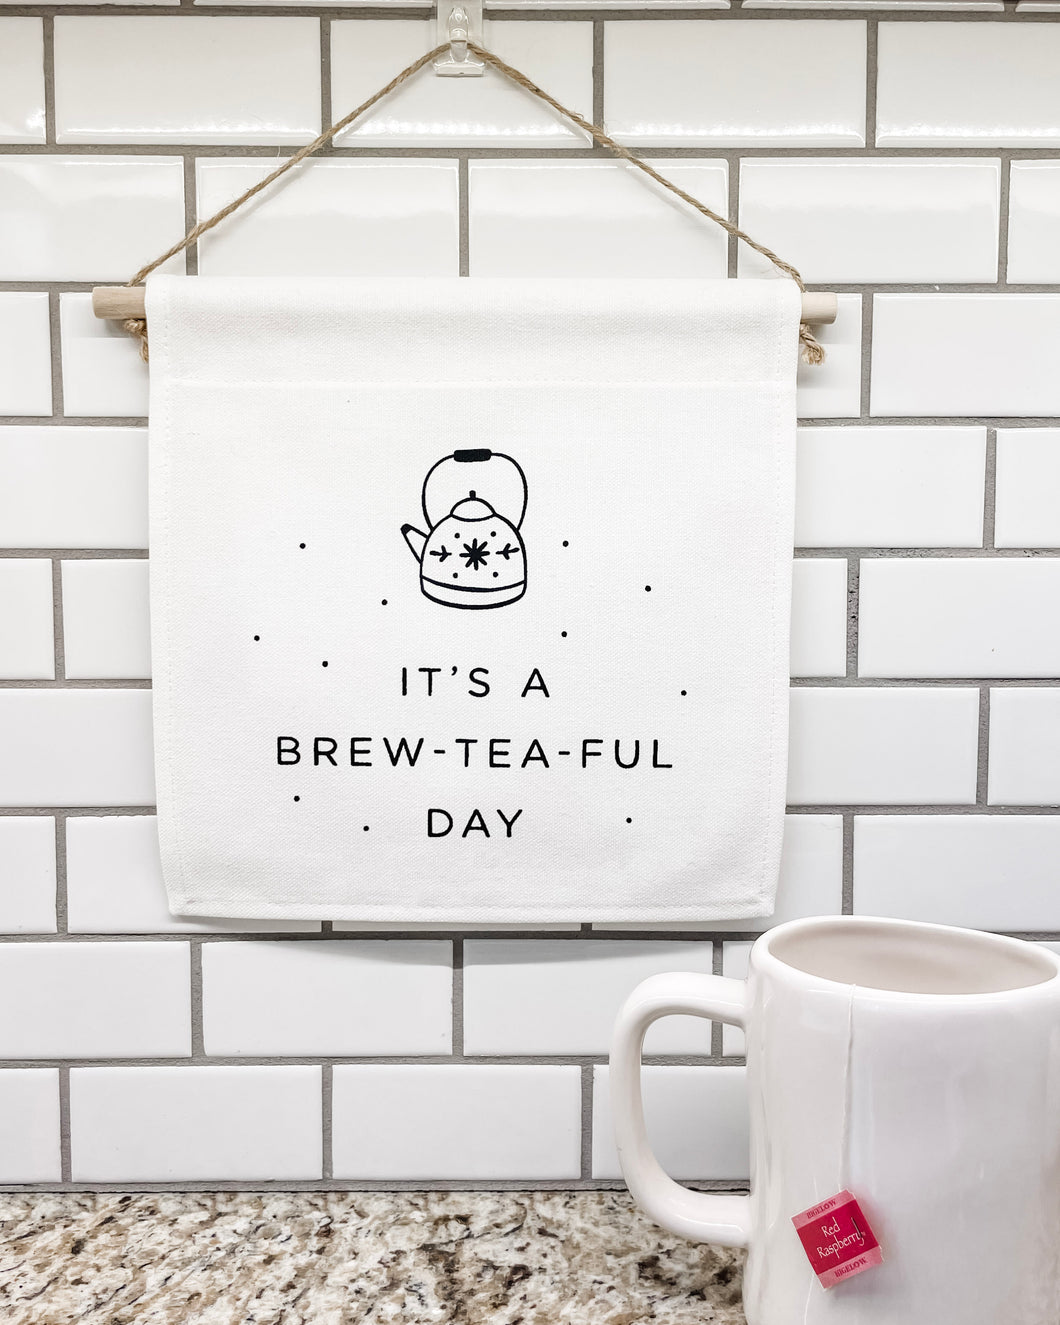 Brew-tea-ful Day Square Banner